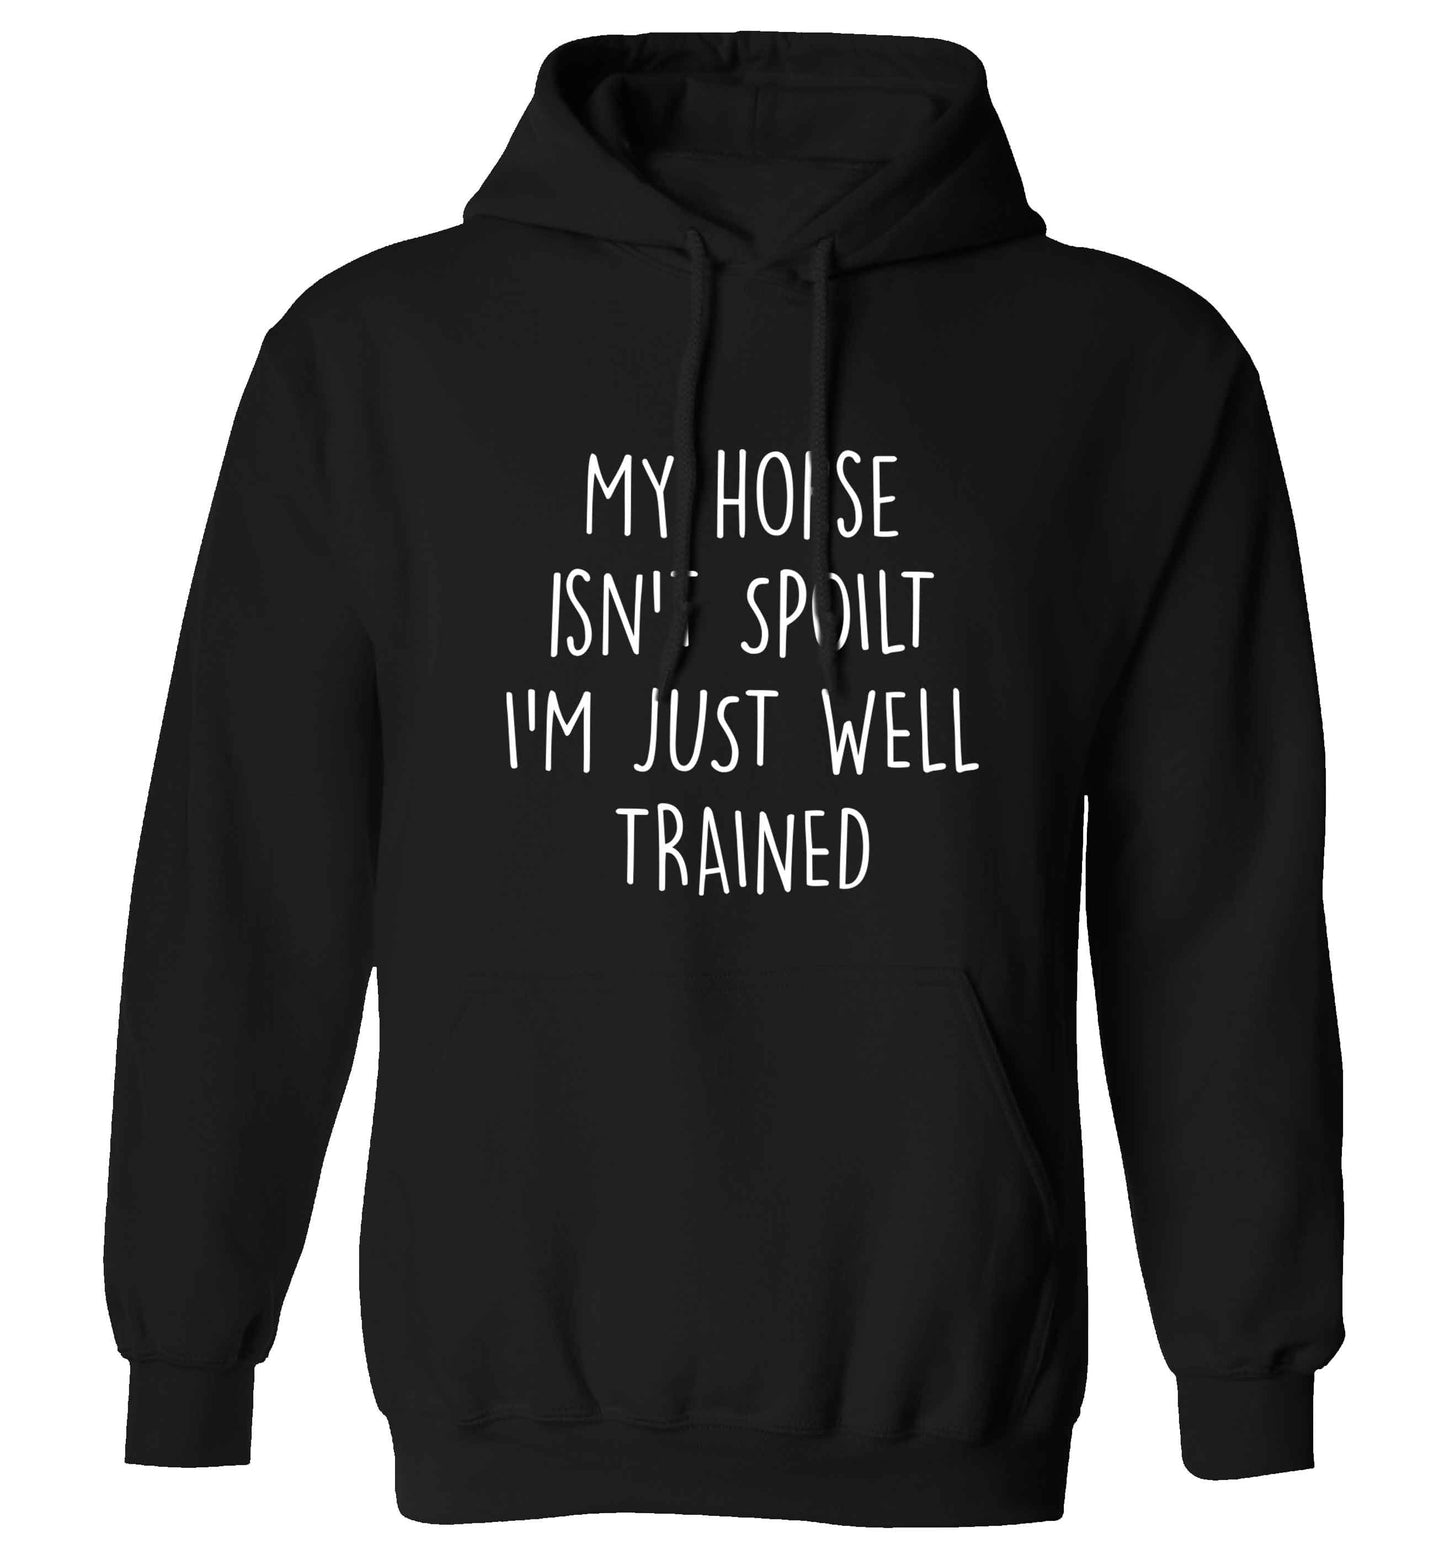 My horse isn't spoilt I'm just well trained adults unisex black hoodie 2XL